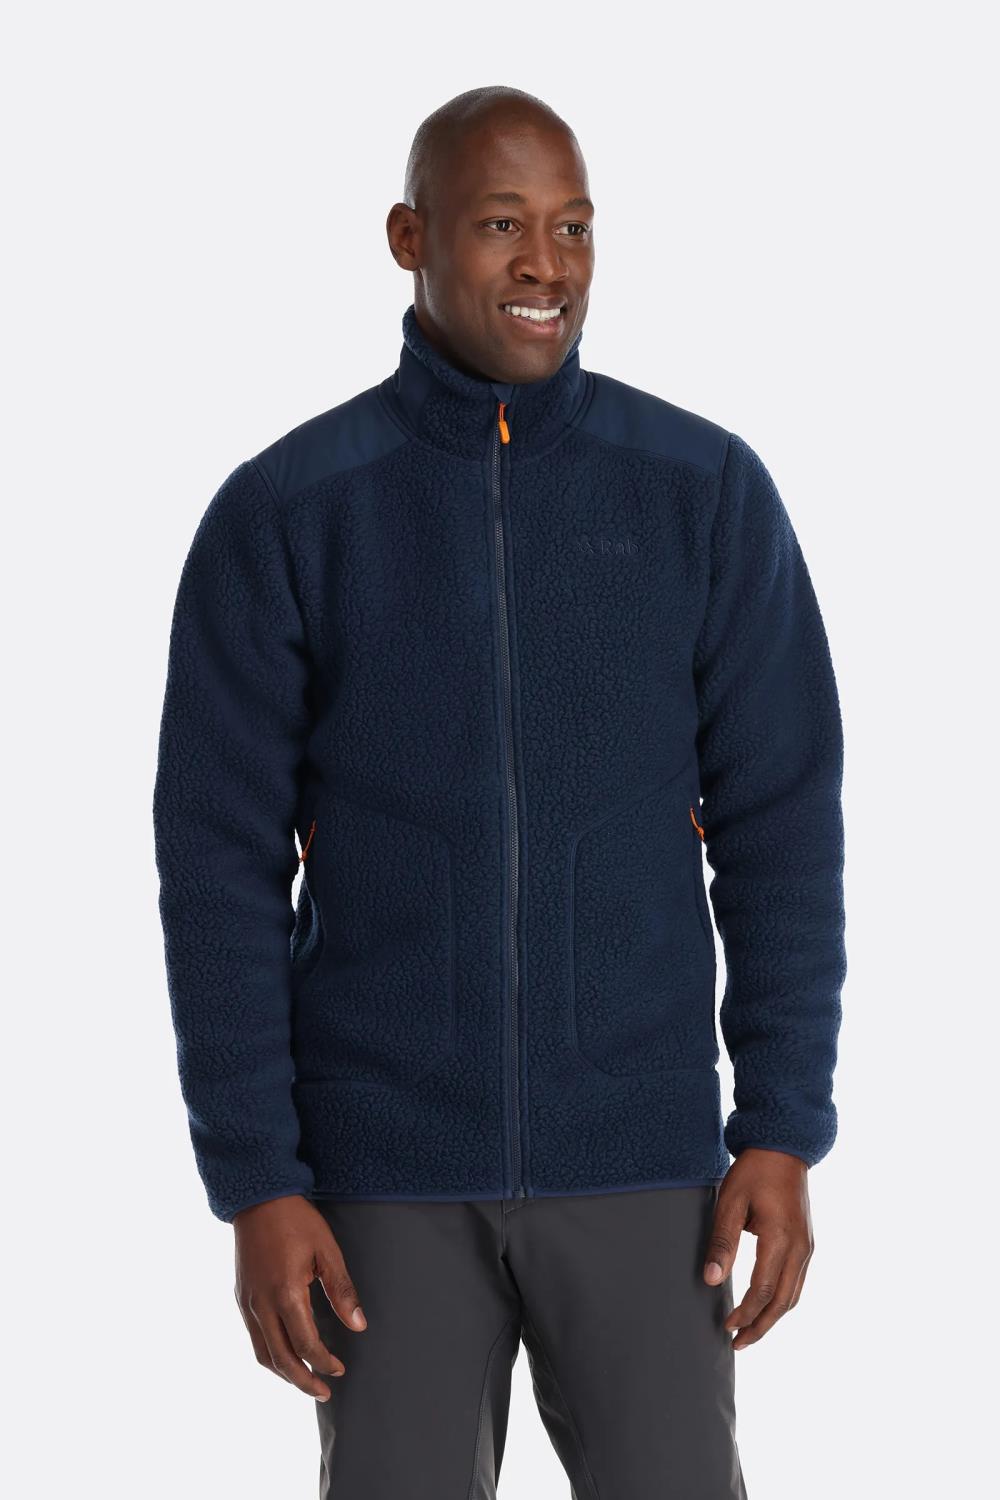 Rab  Outpost Jacket